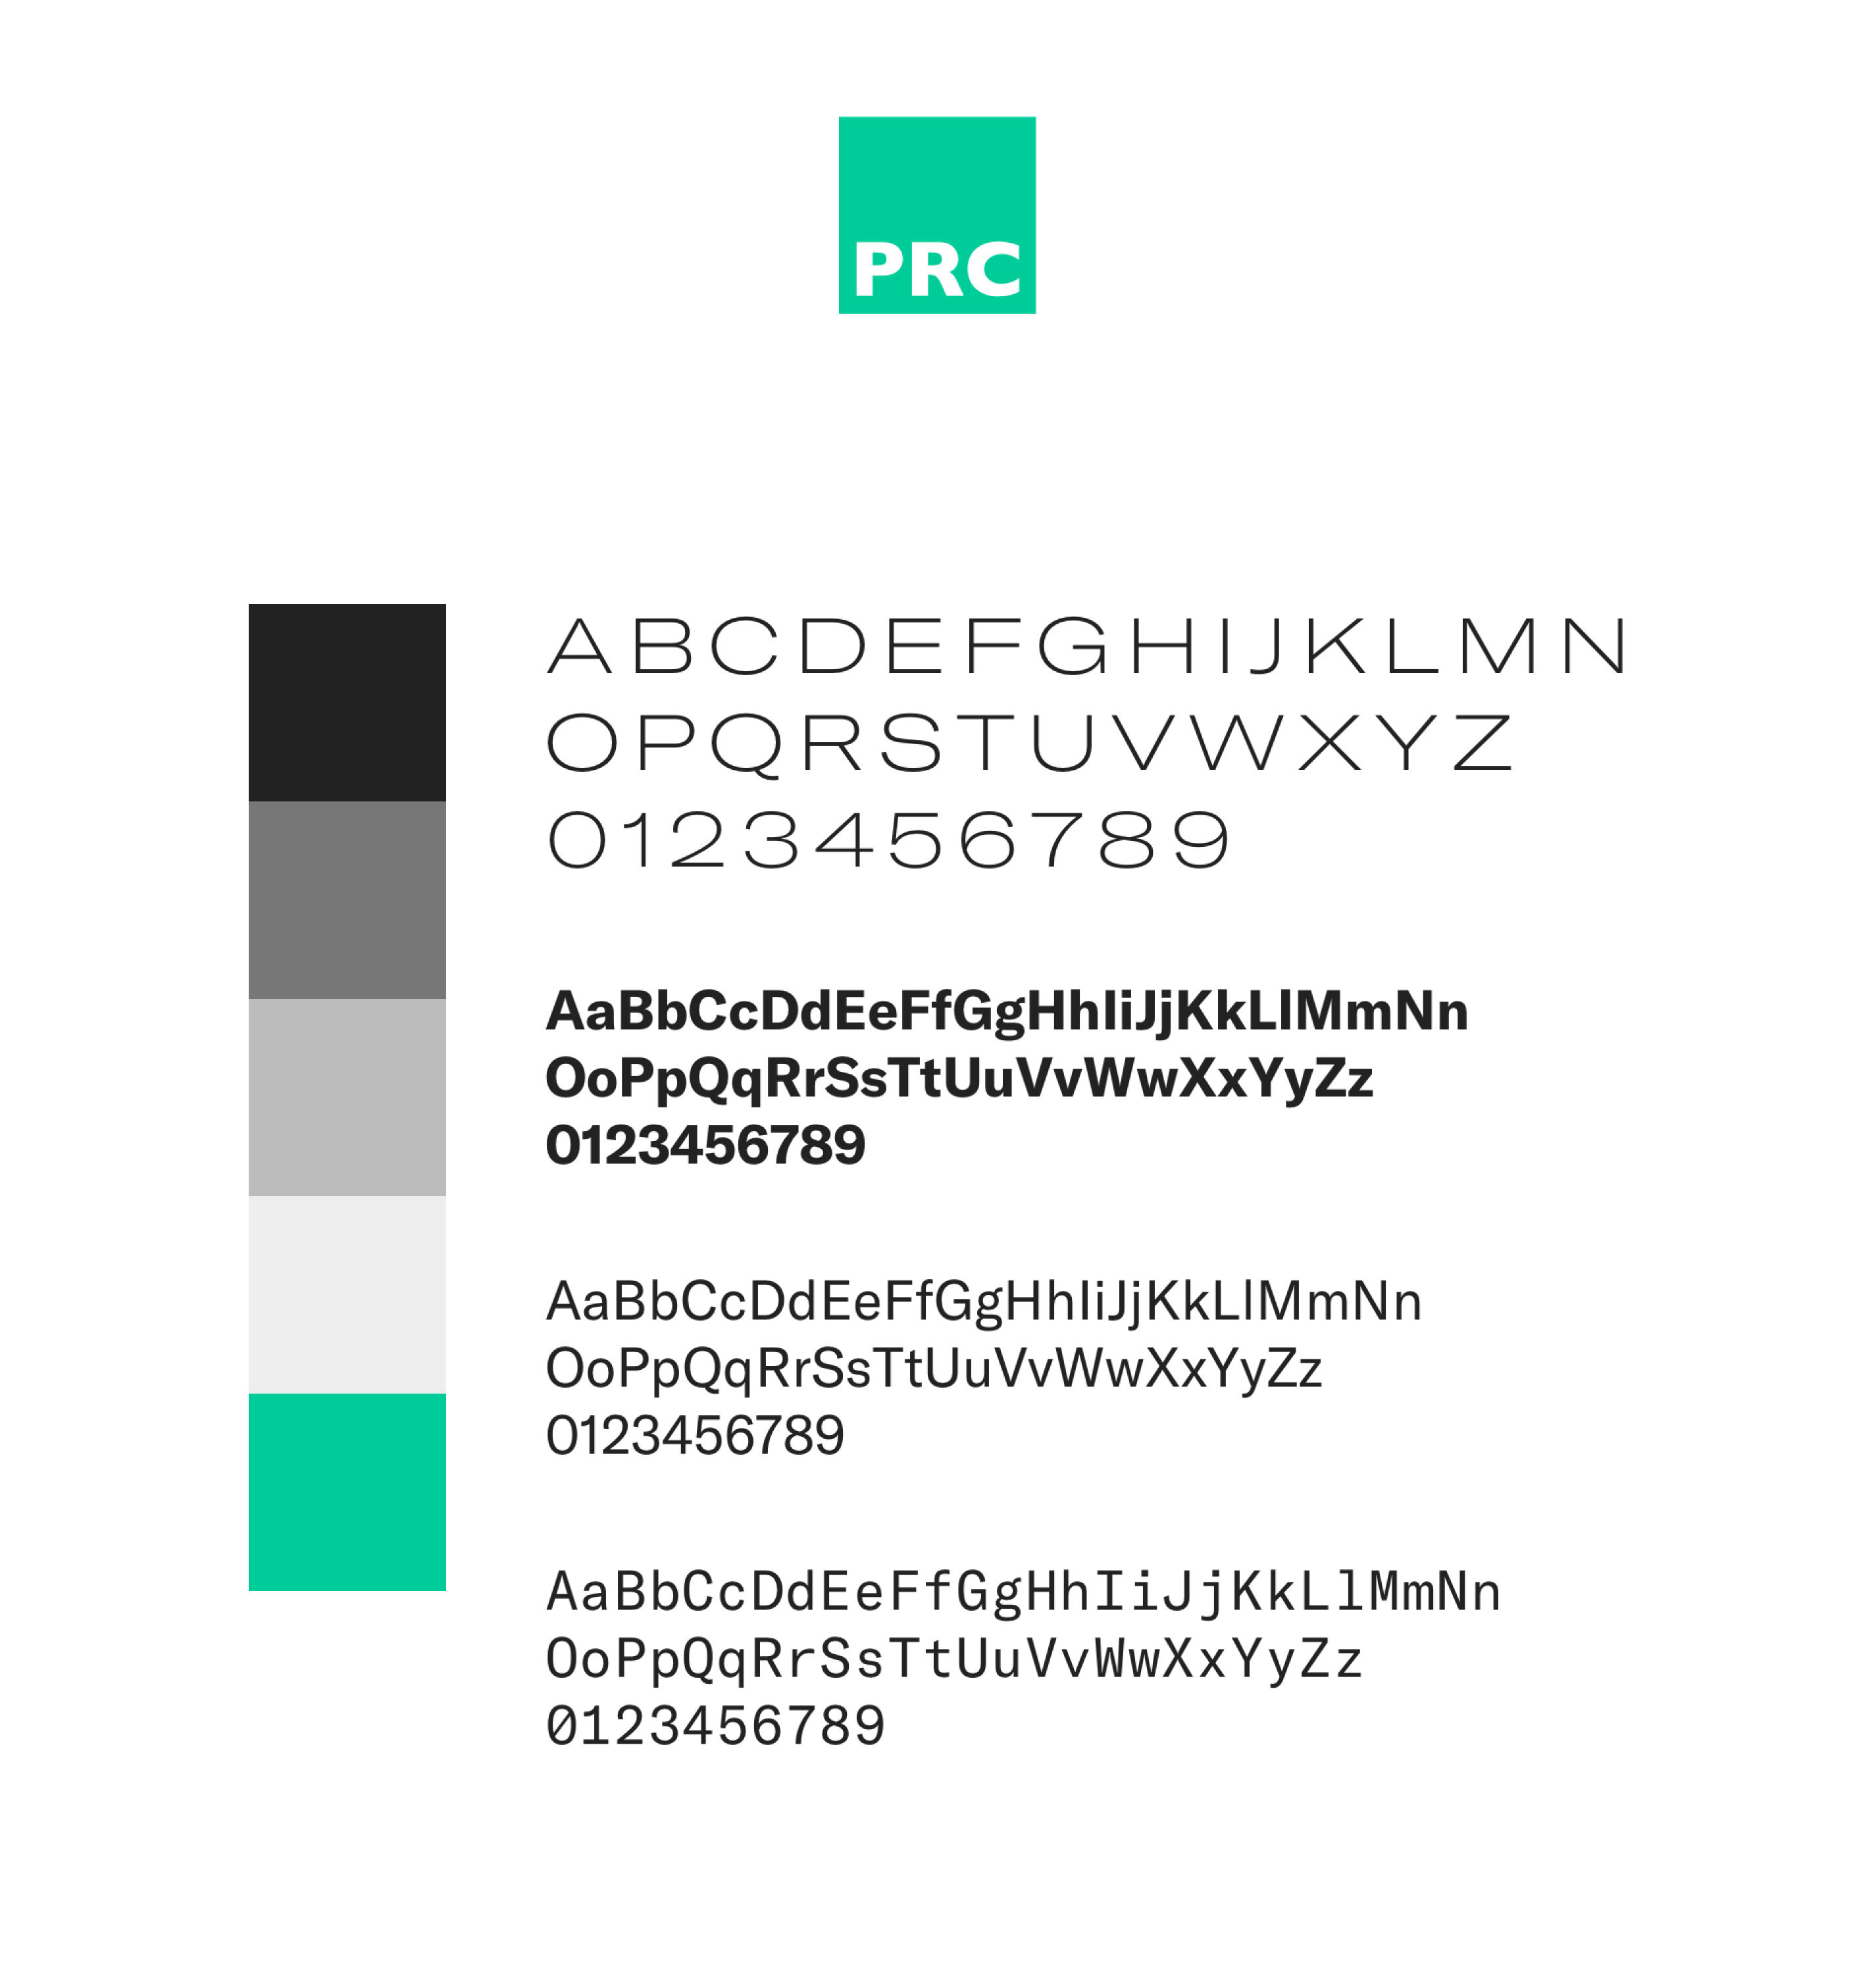 A detailed layout showing the typefaces and colour palette used in the brand.